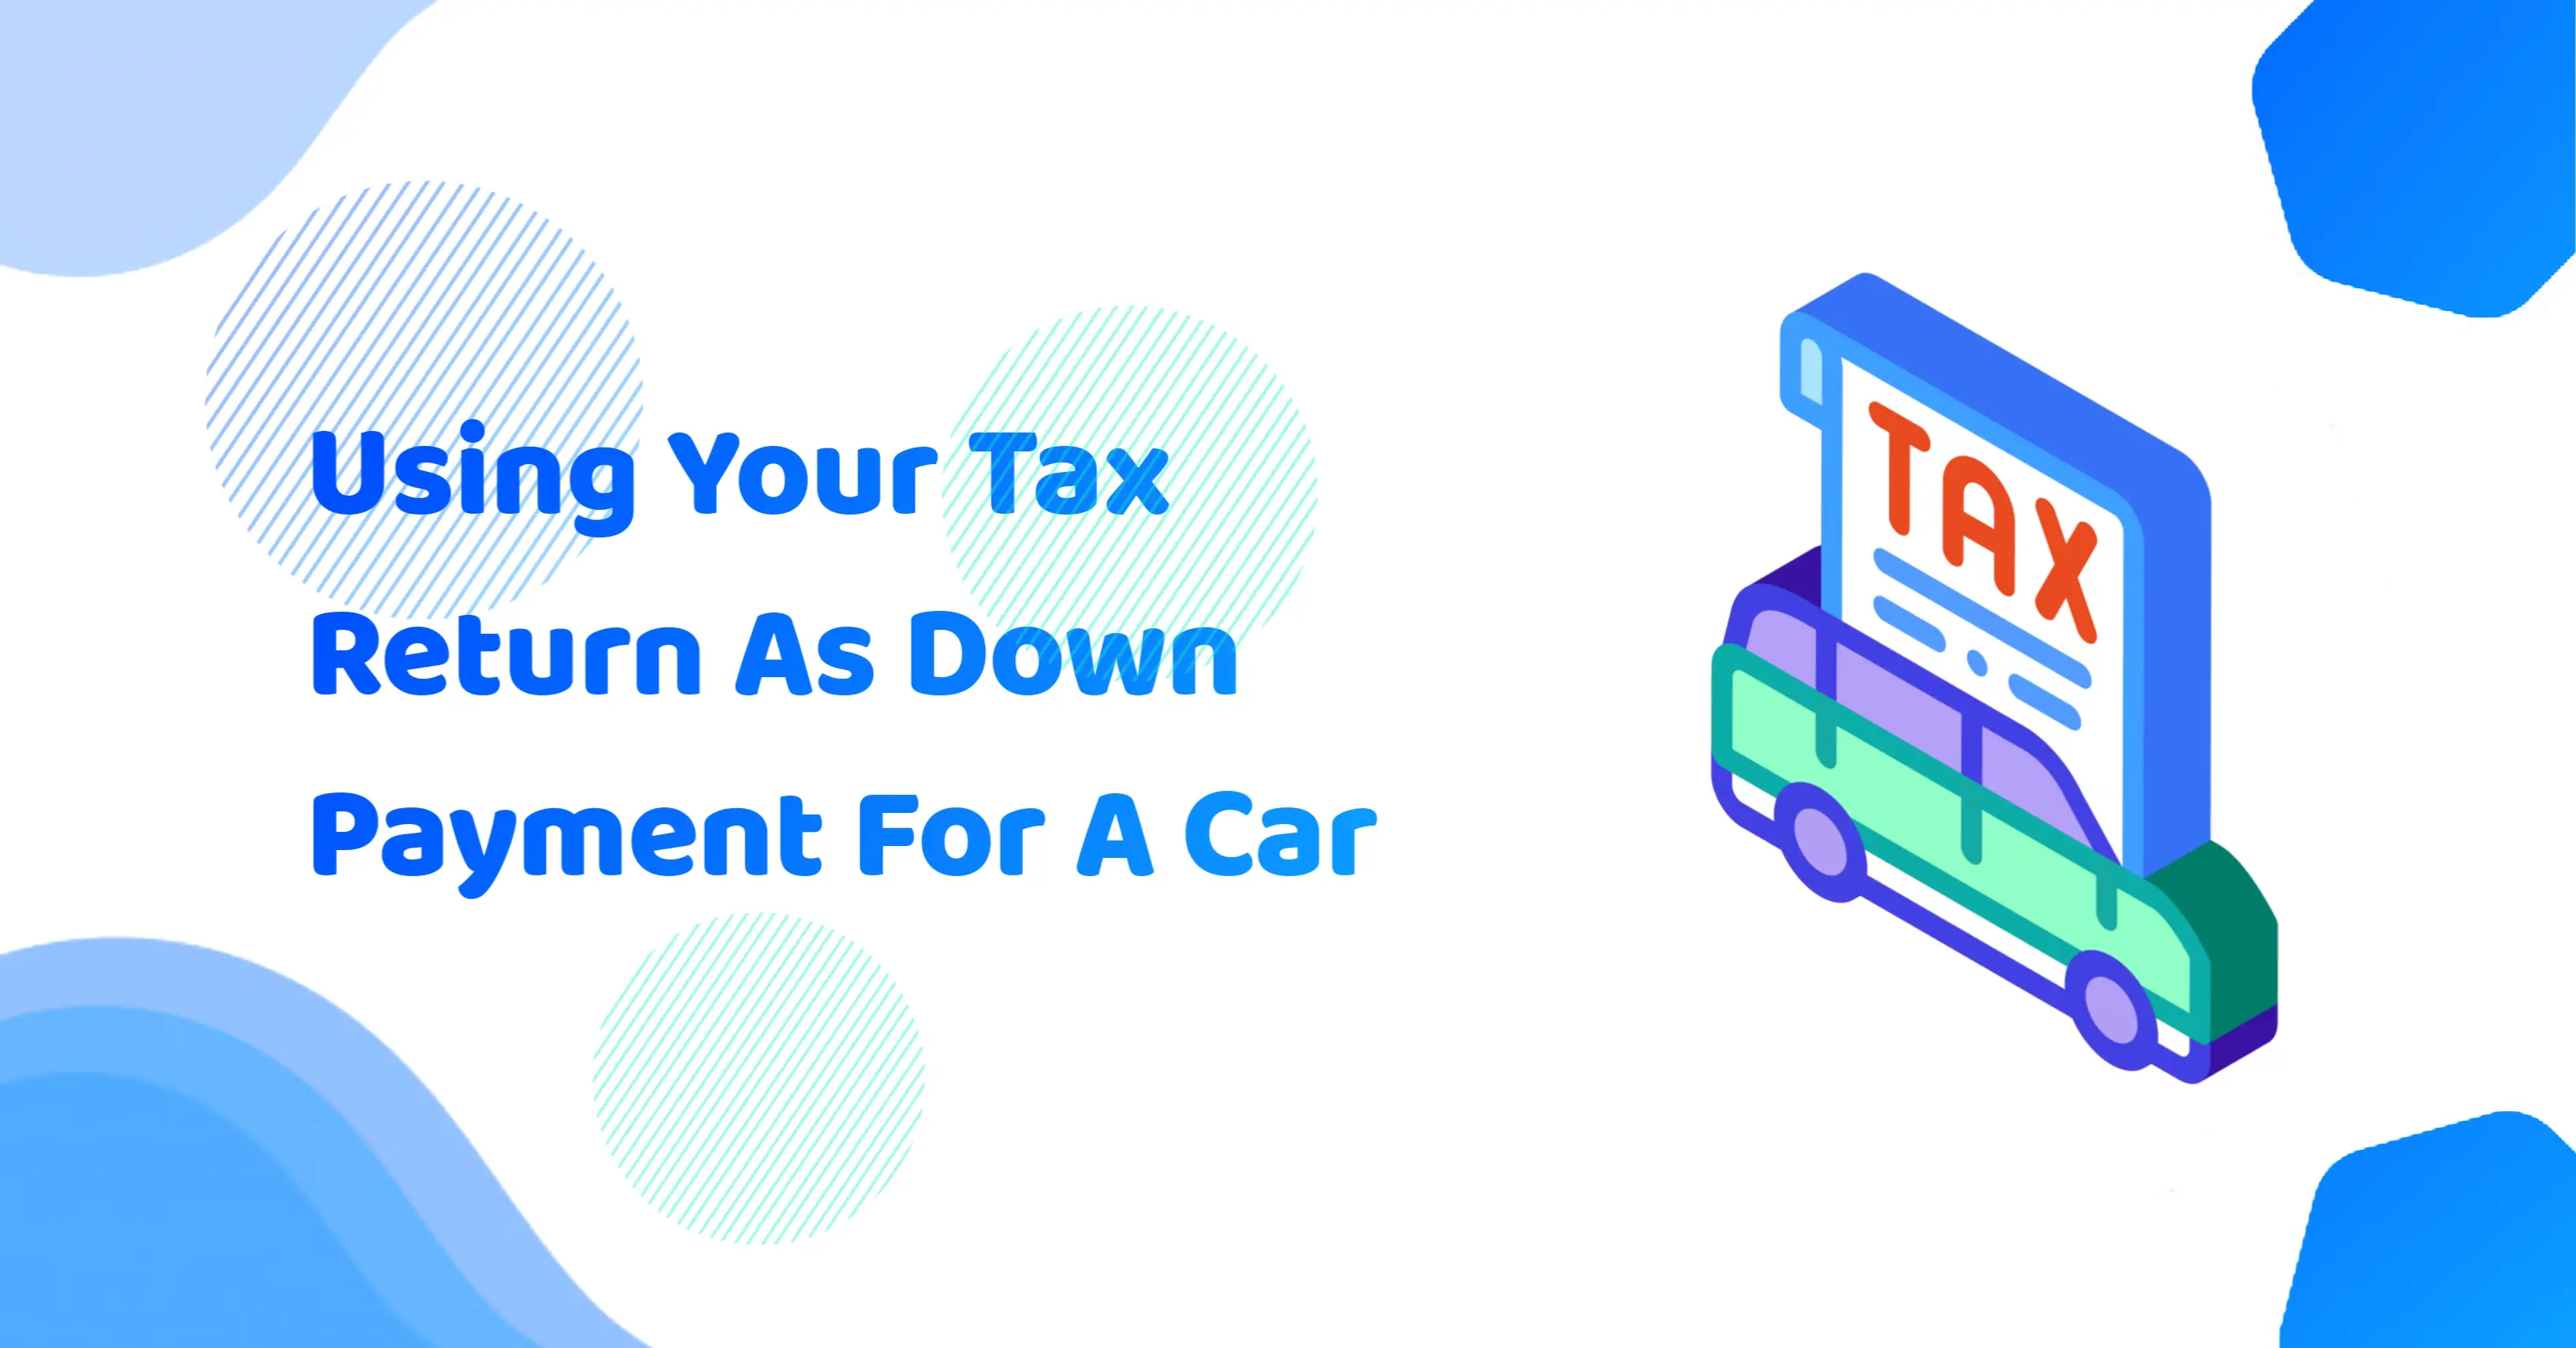 Using Your Tax Return As Down Payment For A Car